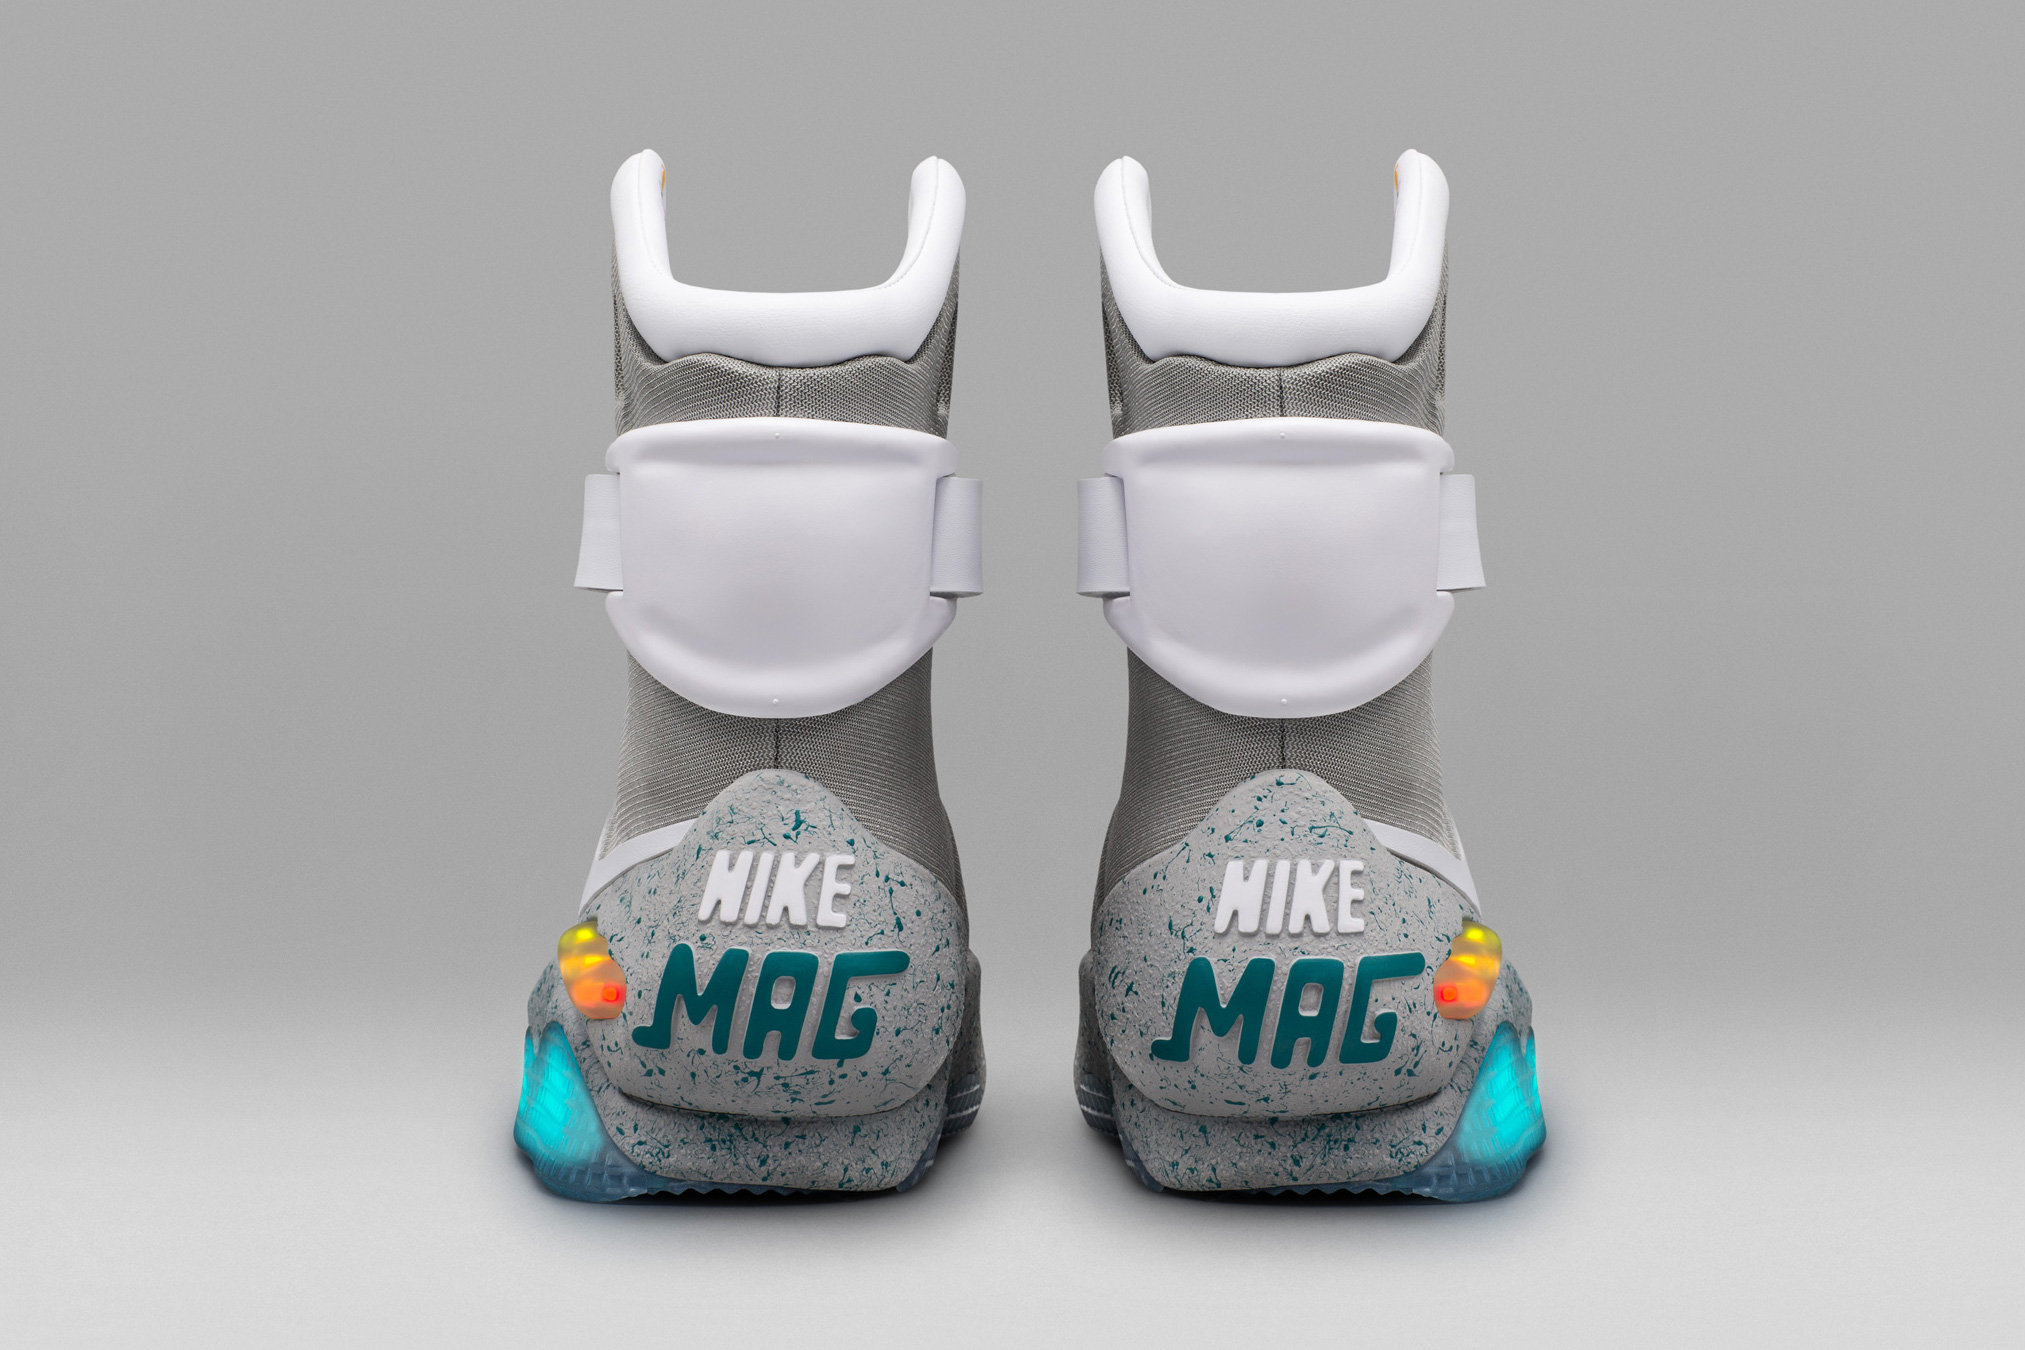 The Nike Mag Self-Lacing Sneakers Are 